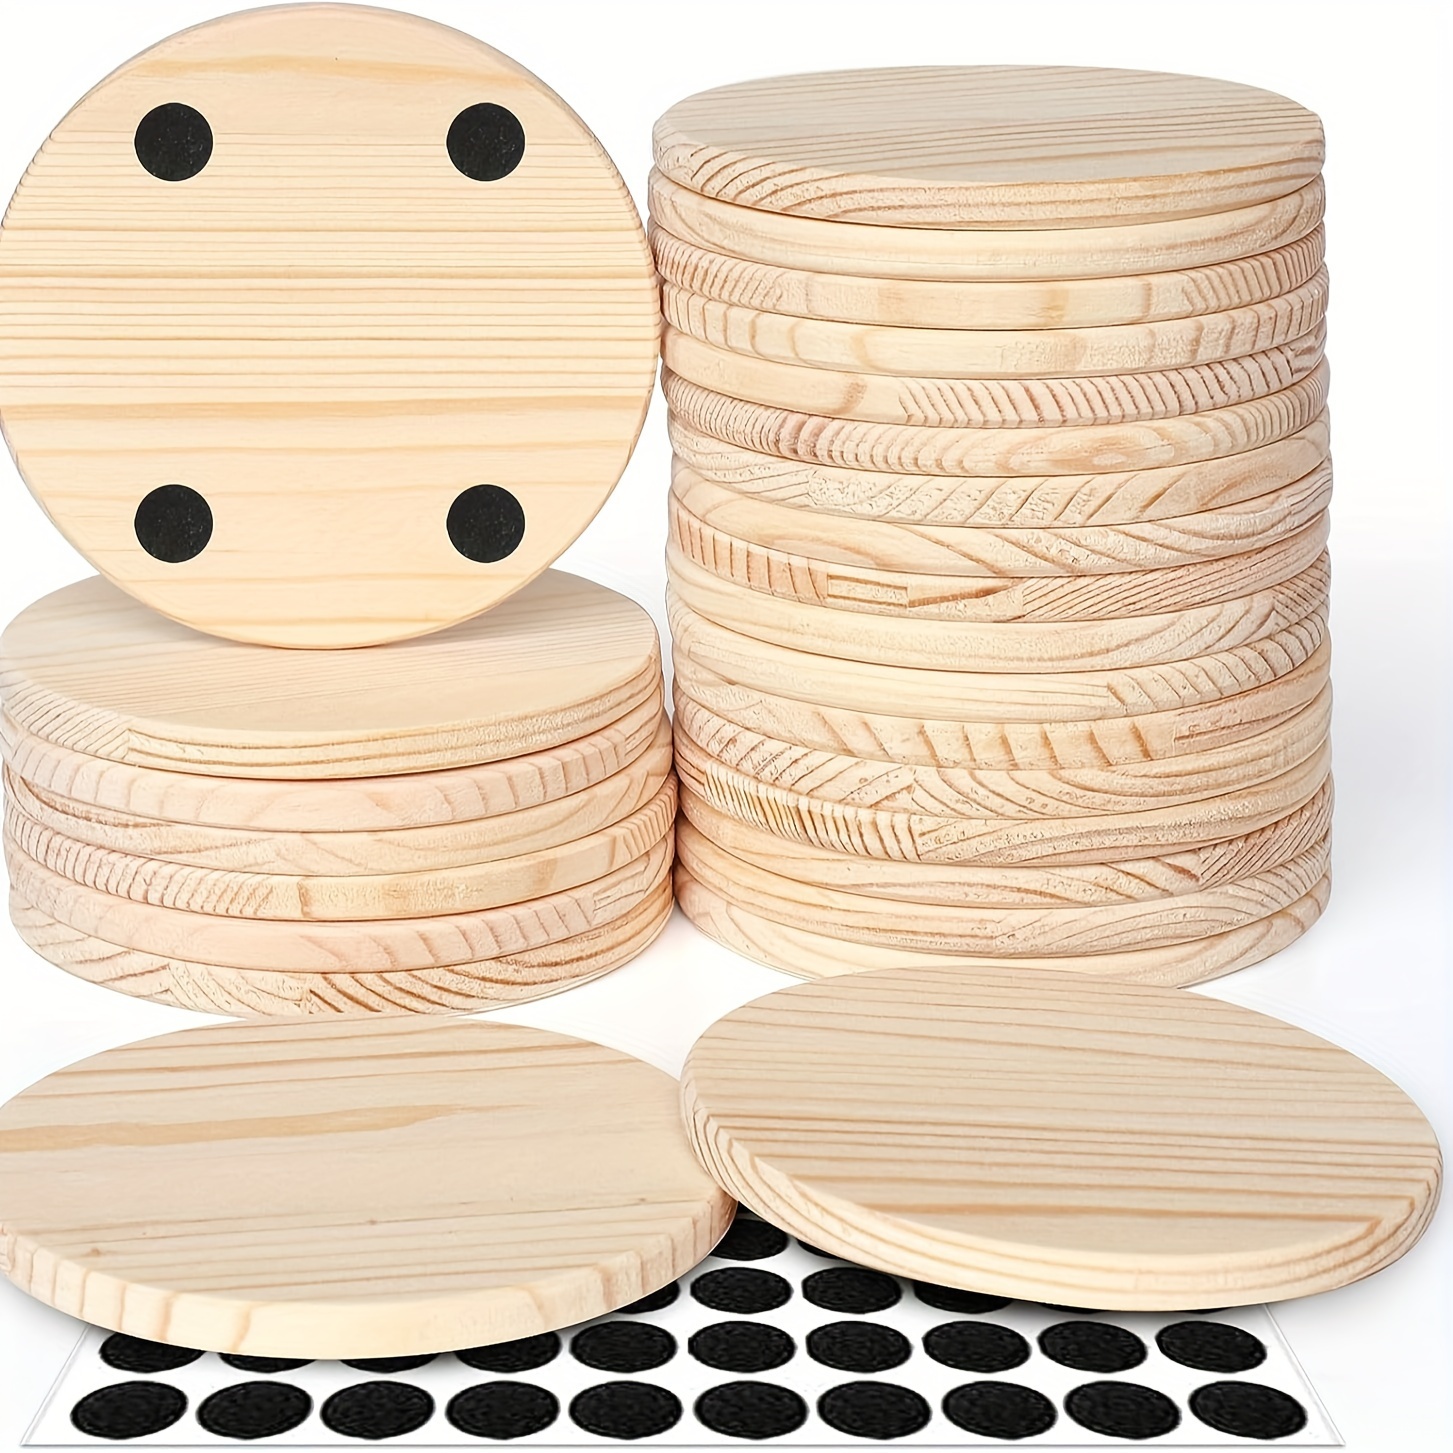 Blank Wooden Coasters